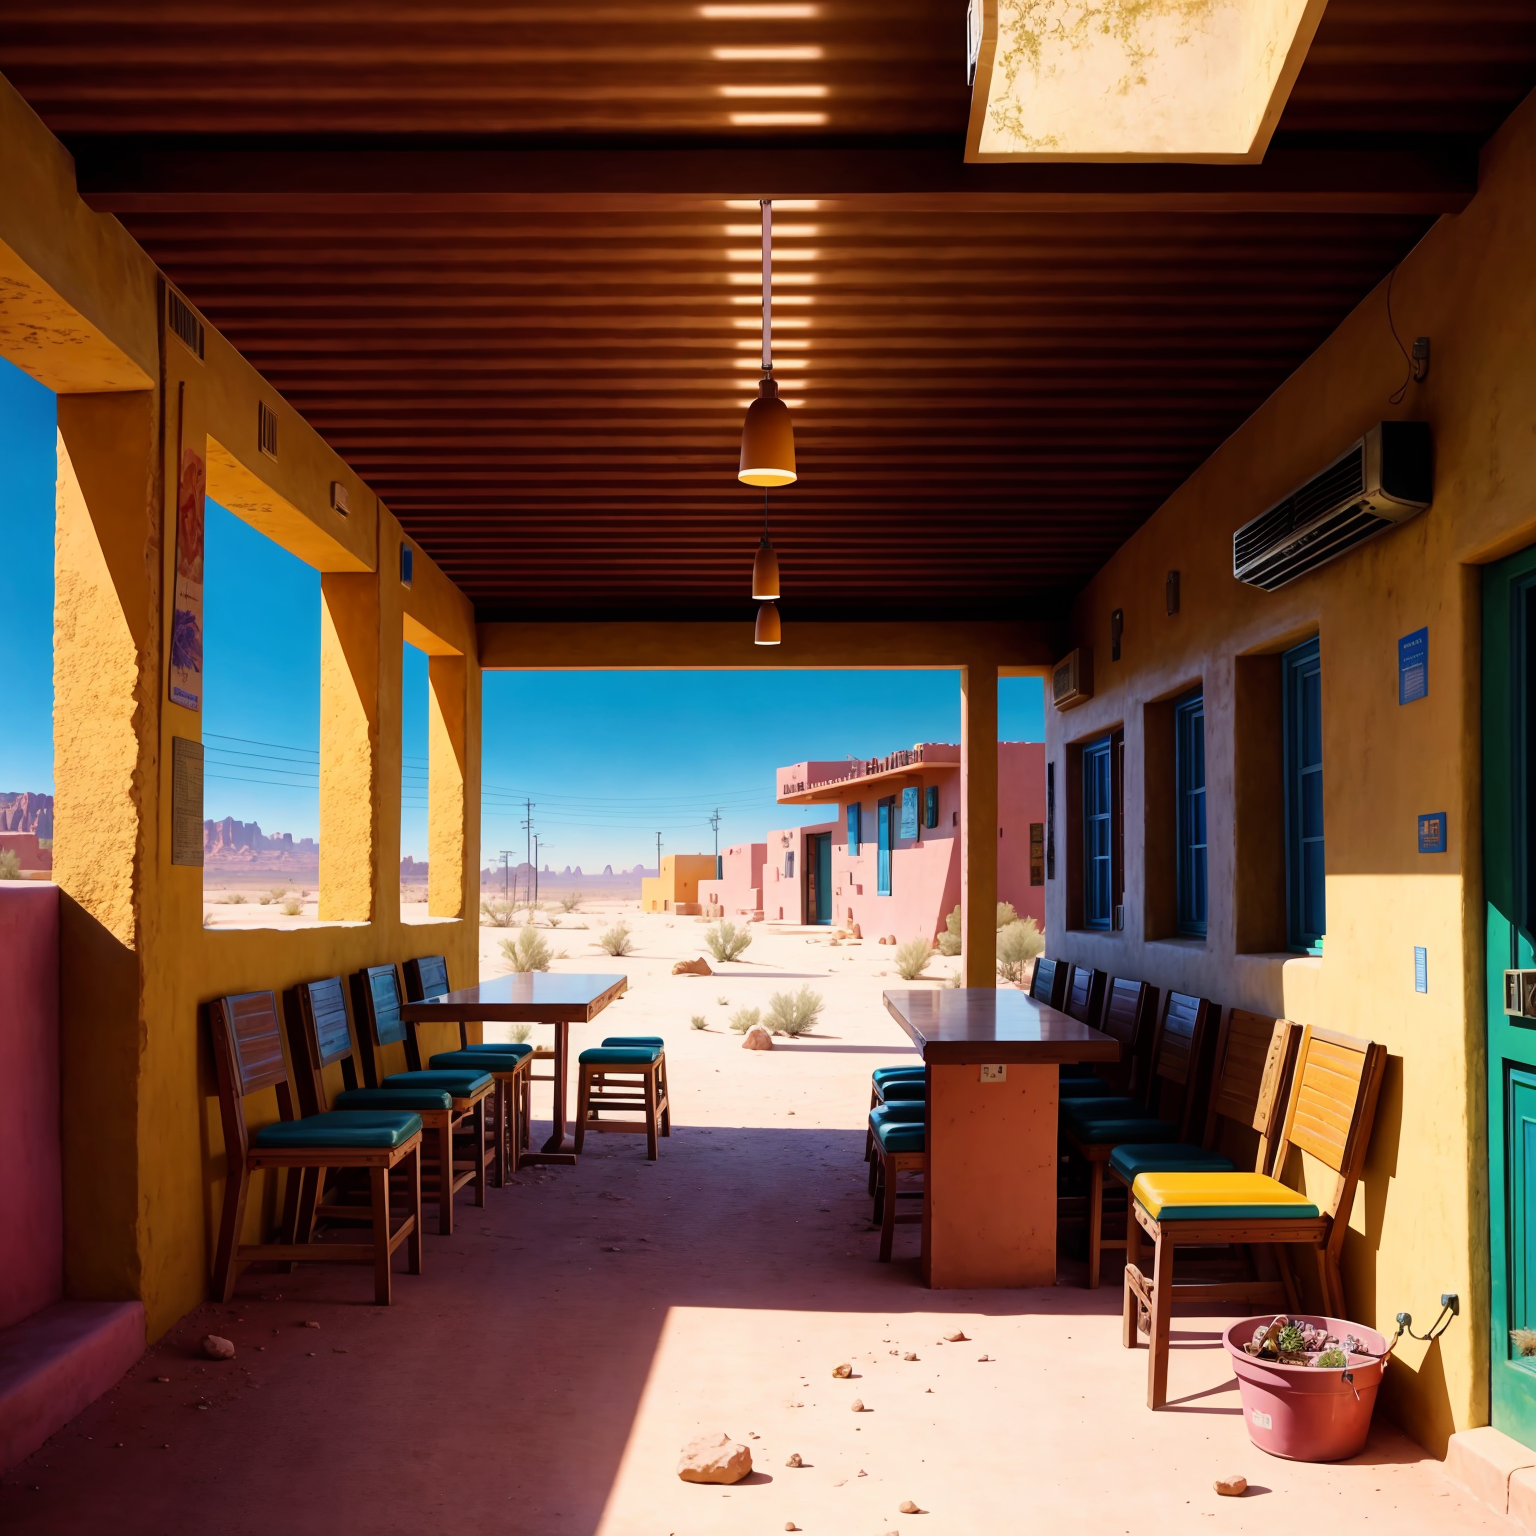 small desert town cantina in northern mexico (SouthOfTheBorderSD15:0.8)
(masterpiece:1.1) (best quality) (detailed) (intri...